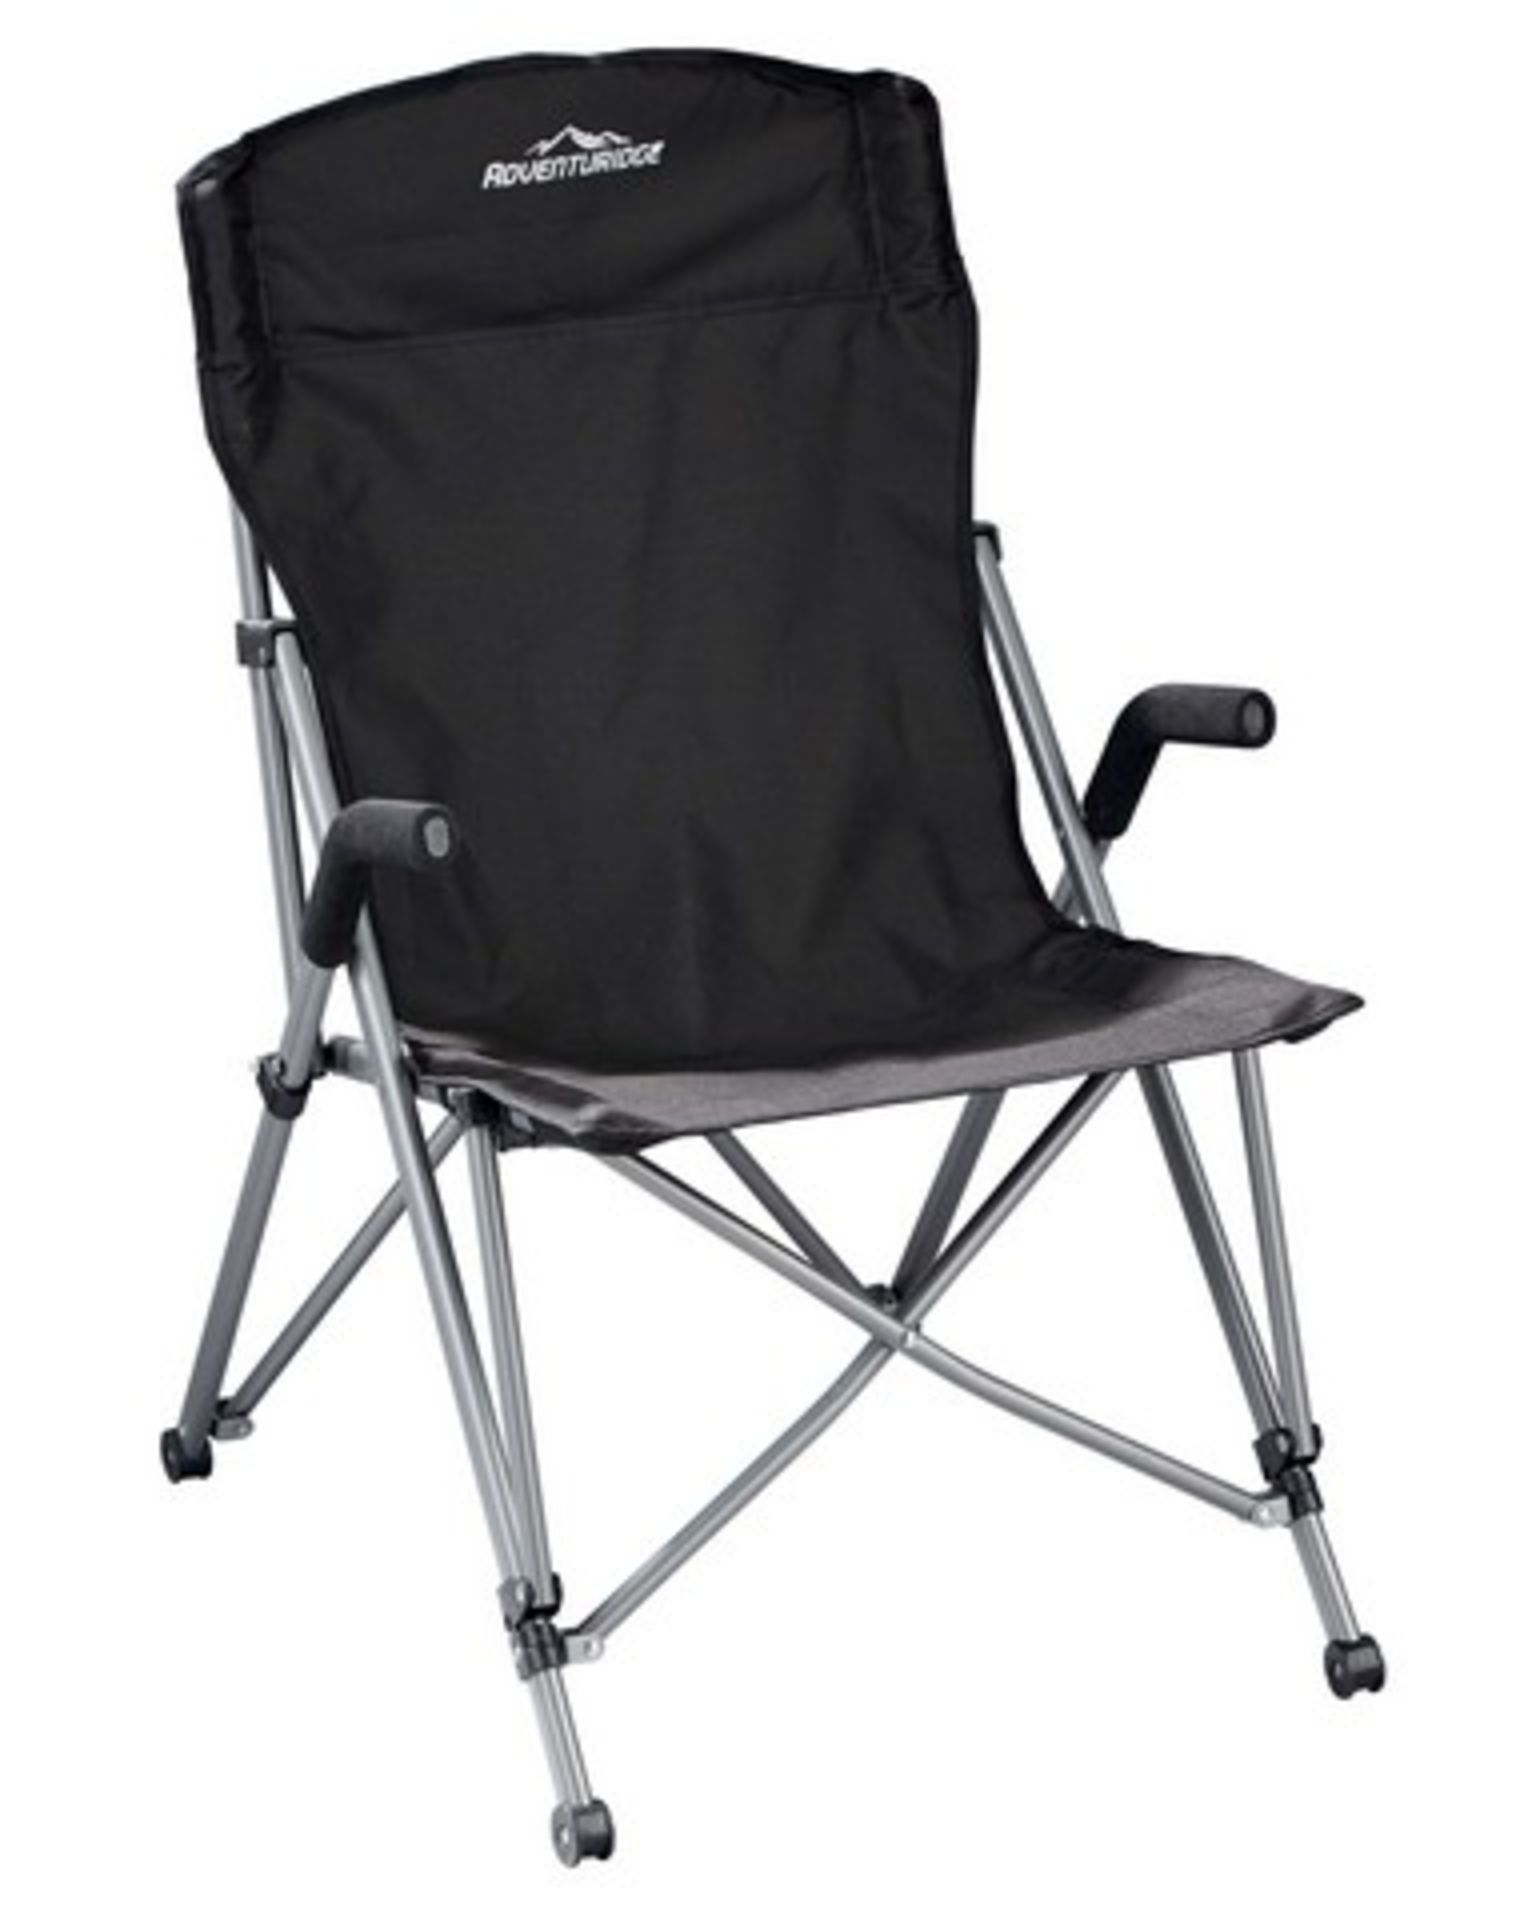 V Brand New Tourer/Expedition Chair In Silver/Black With Carry Case - Lightweight Steel Frame - Image 2 of 2